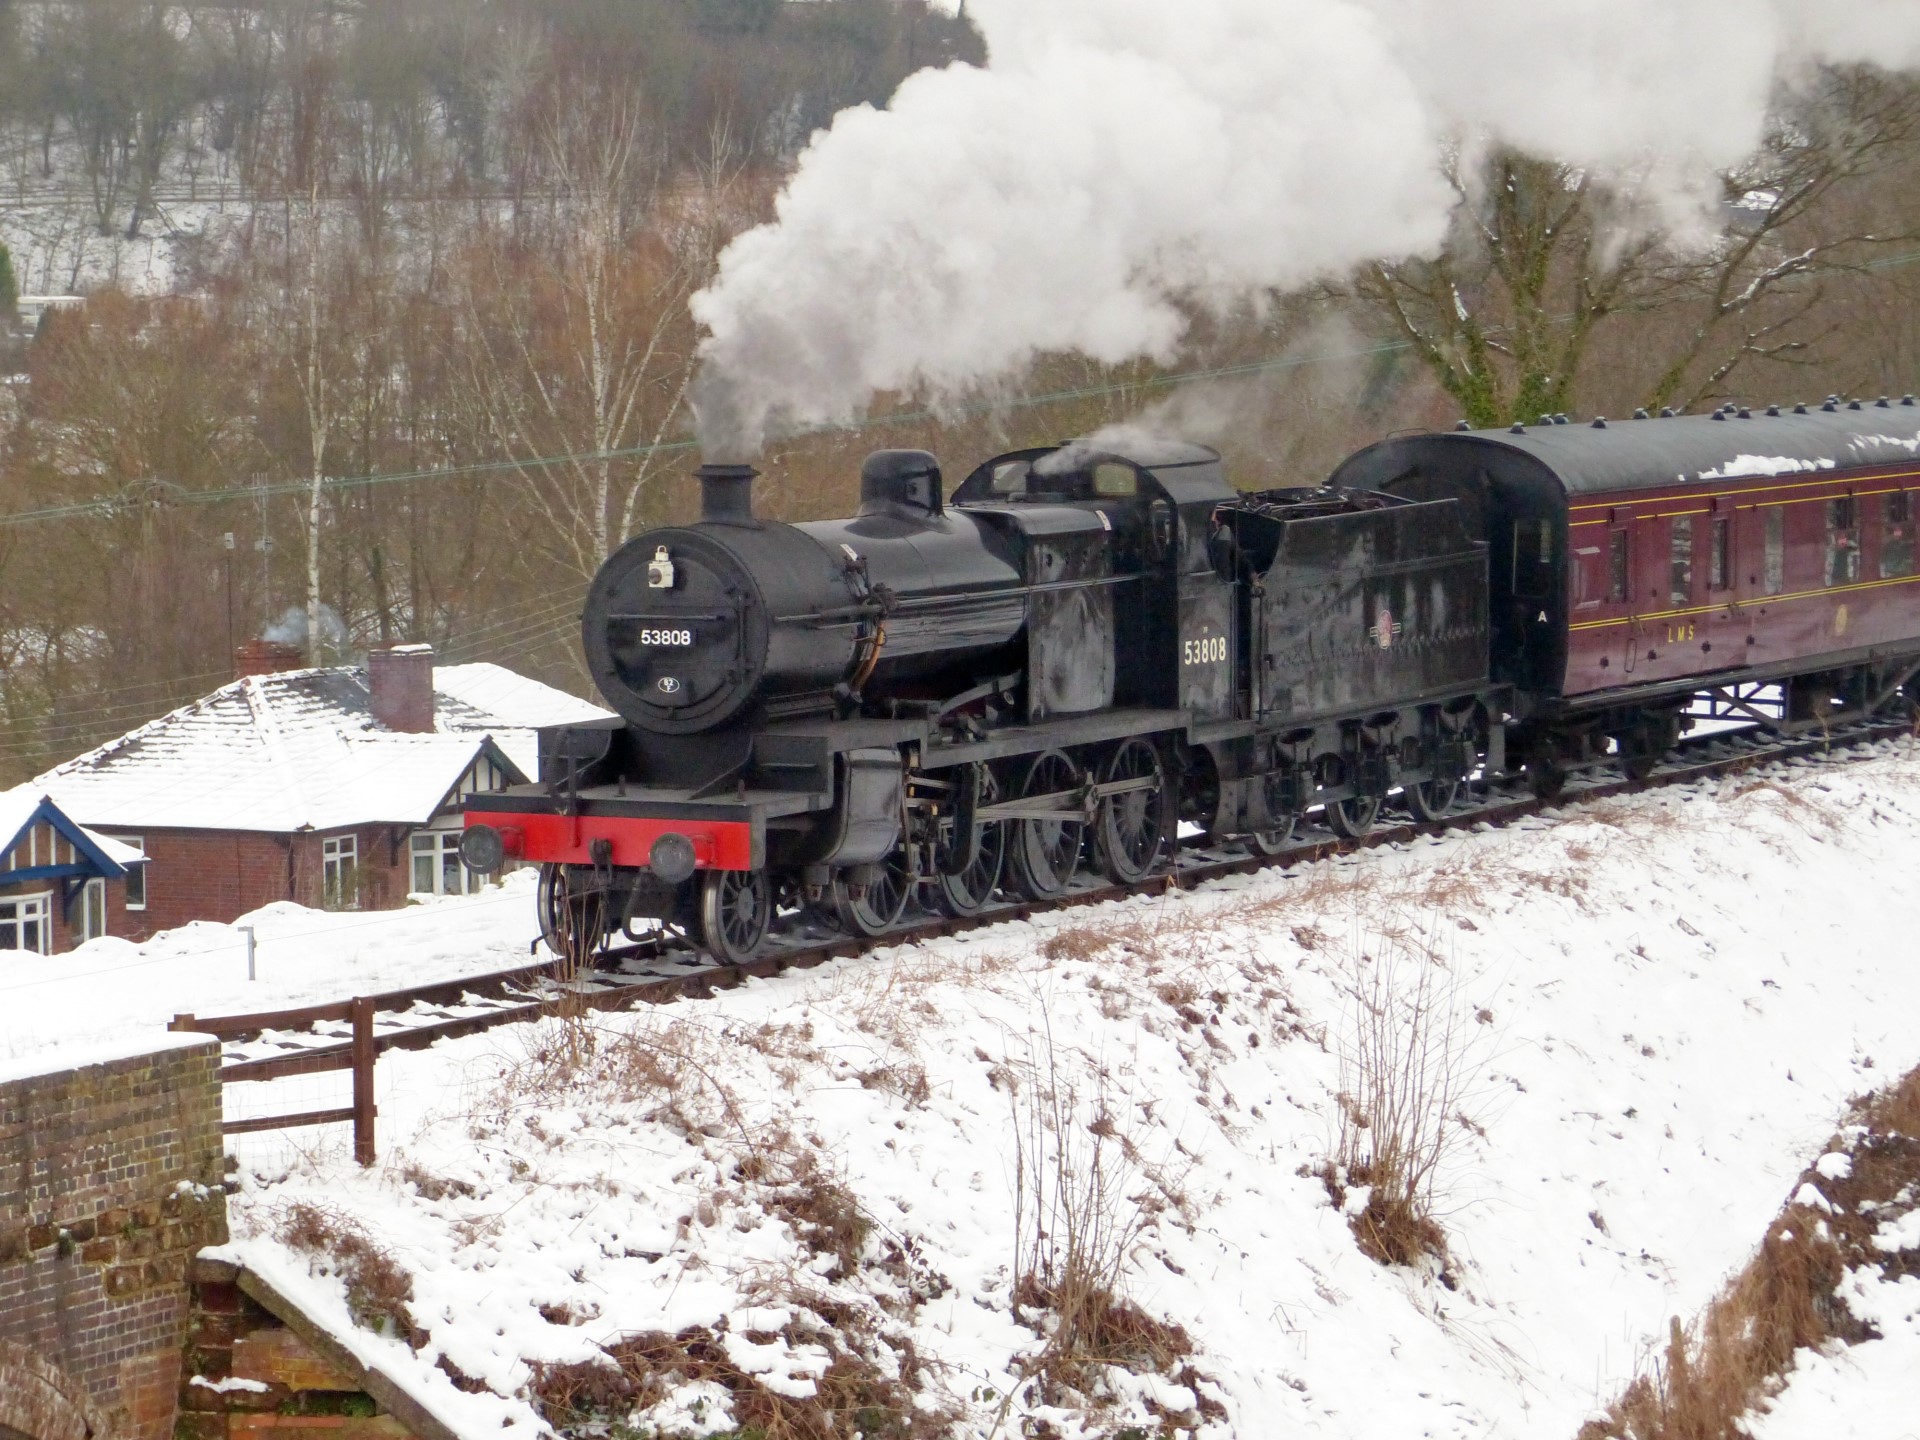 53808 in the snow on Sunday 18 March